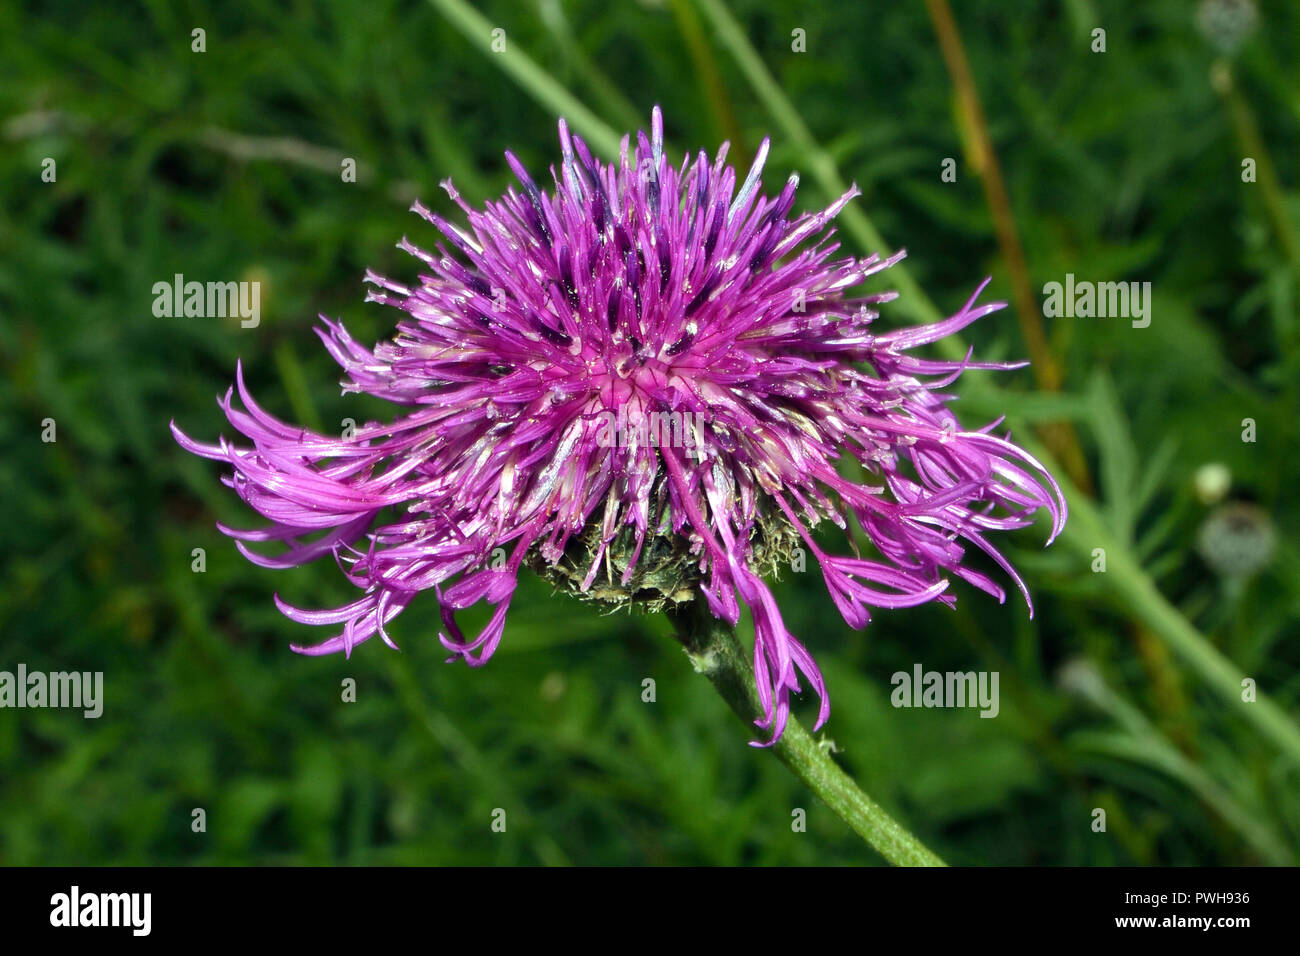 Centaurea scabiosa (greater knapweed) is a perennial plant native to Europe. It is  found in dry grasslands, hedgerows and cliffs on lime-rich soil. Stock Photo